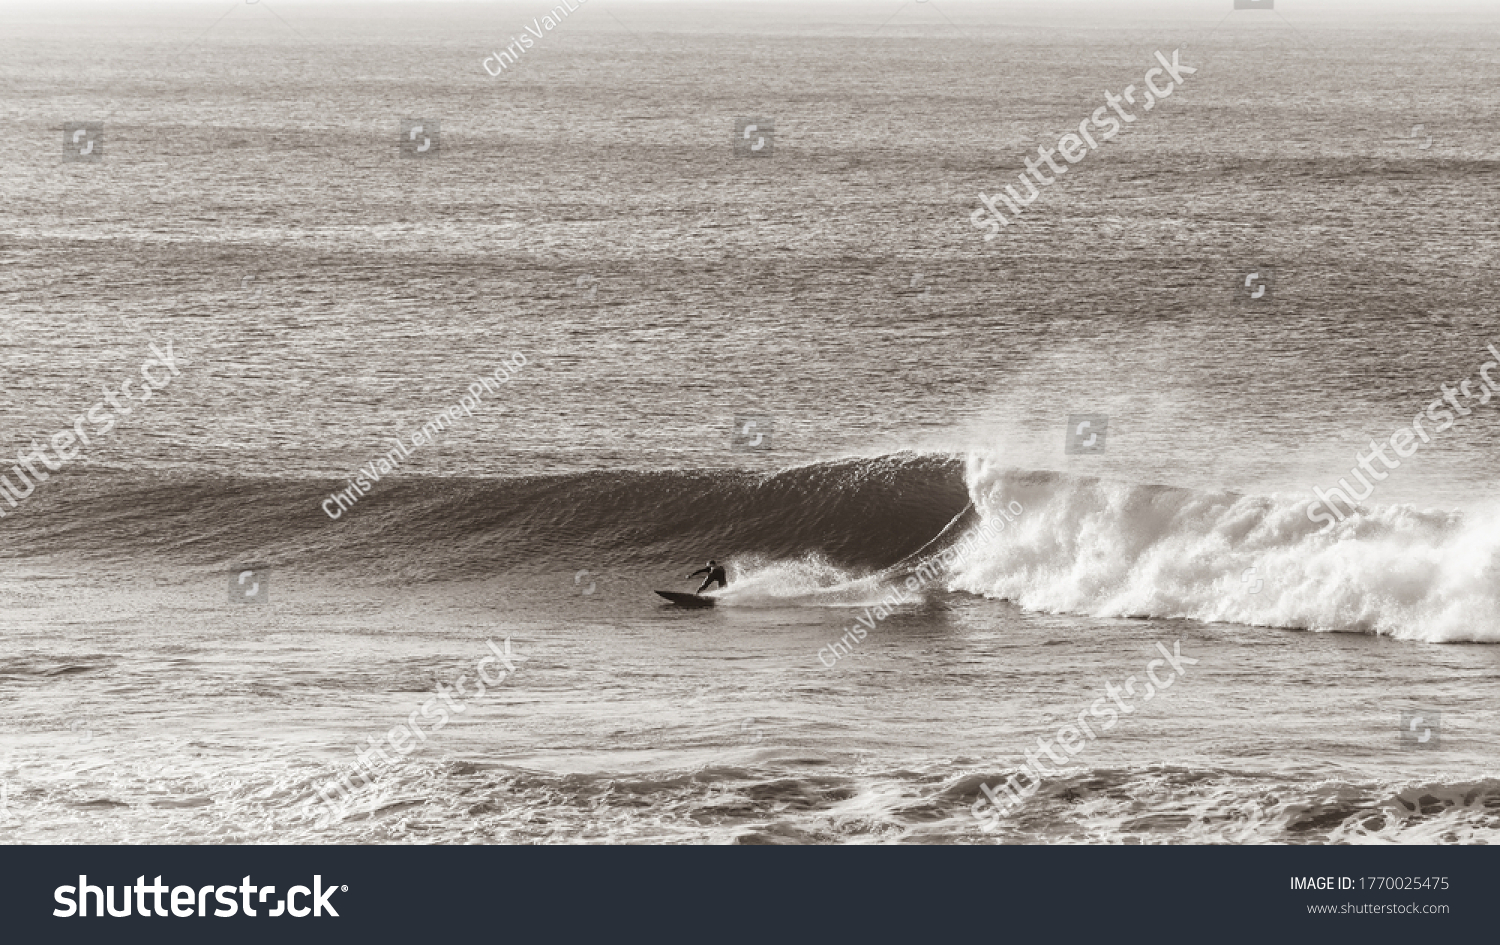 Surfer Surfing bottom turning on ocean wave in vintage sepia tone  overlooking  panoramic photo. #1770025475